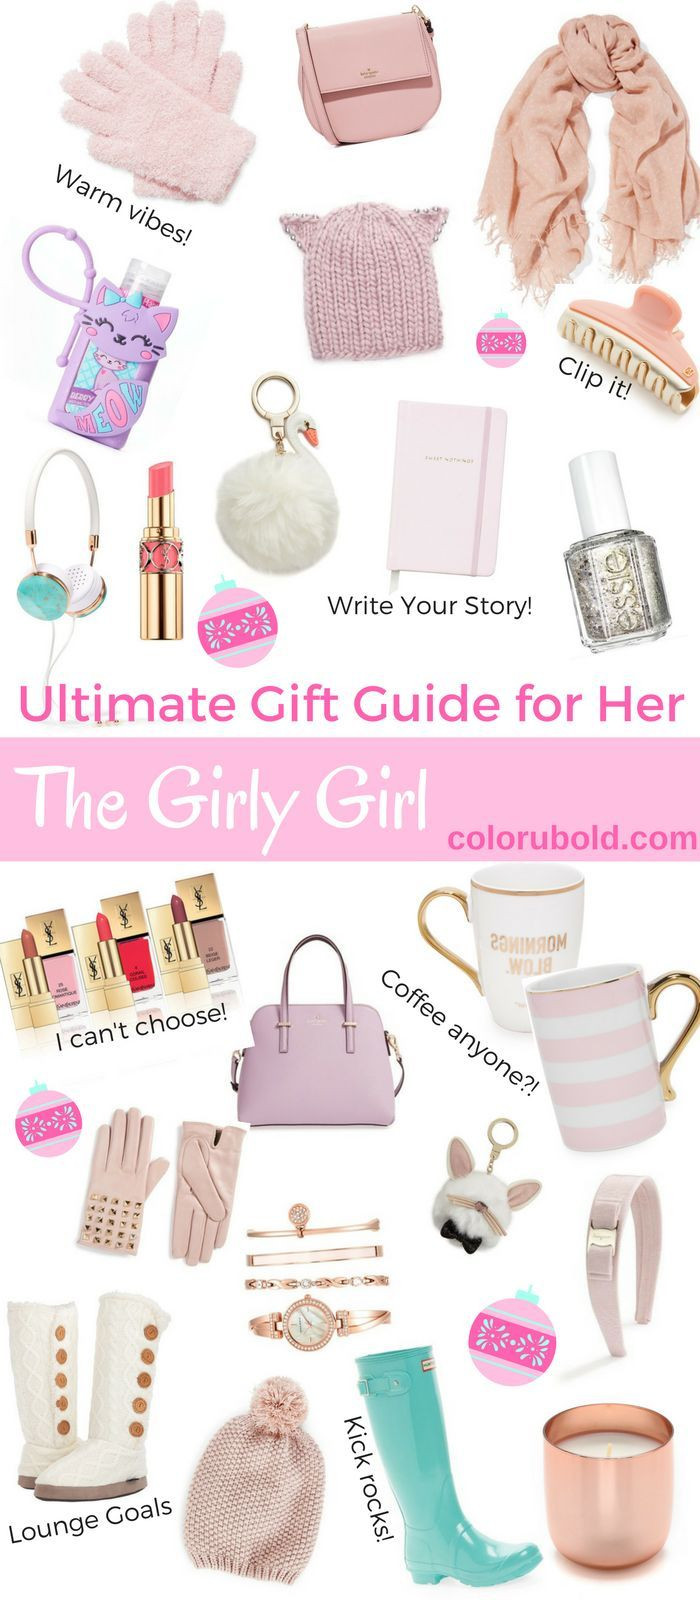 Birthday Gift Ideas For Girls
 The Ultimate Gift Guide for the Girly Girl